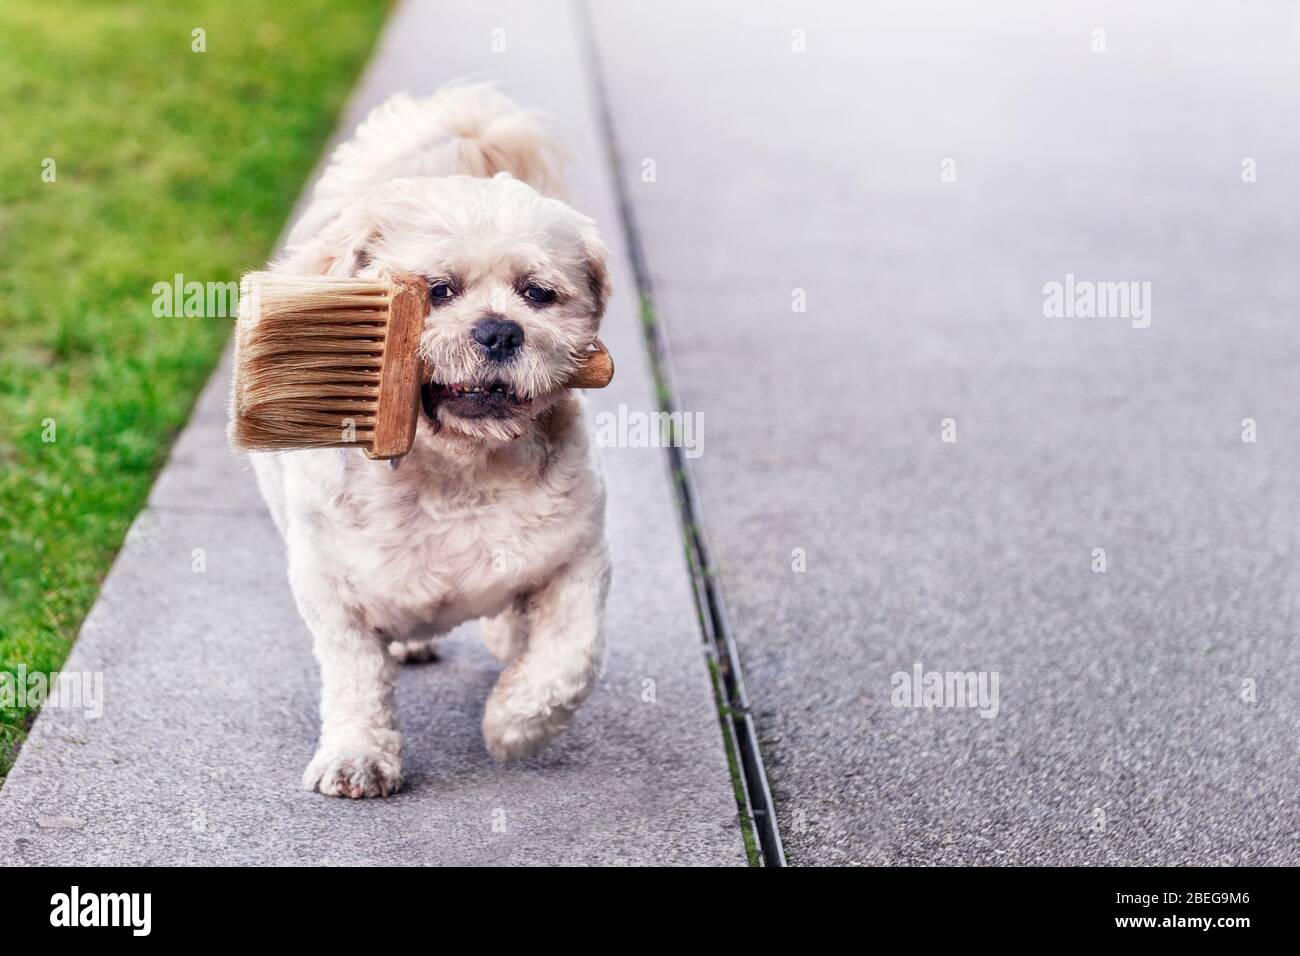 Small cute dog walking towards the camera with a paintbrush in its mouth Stock Photo